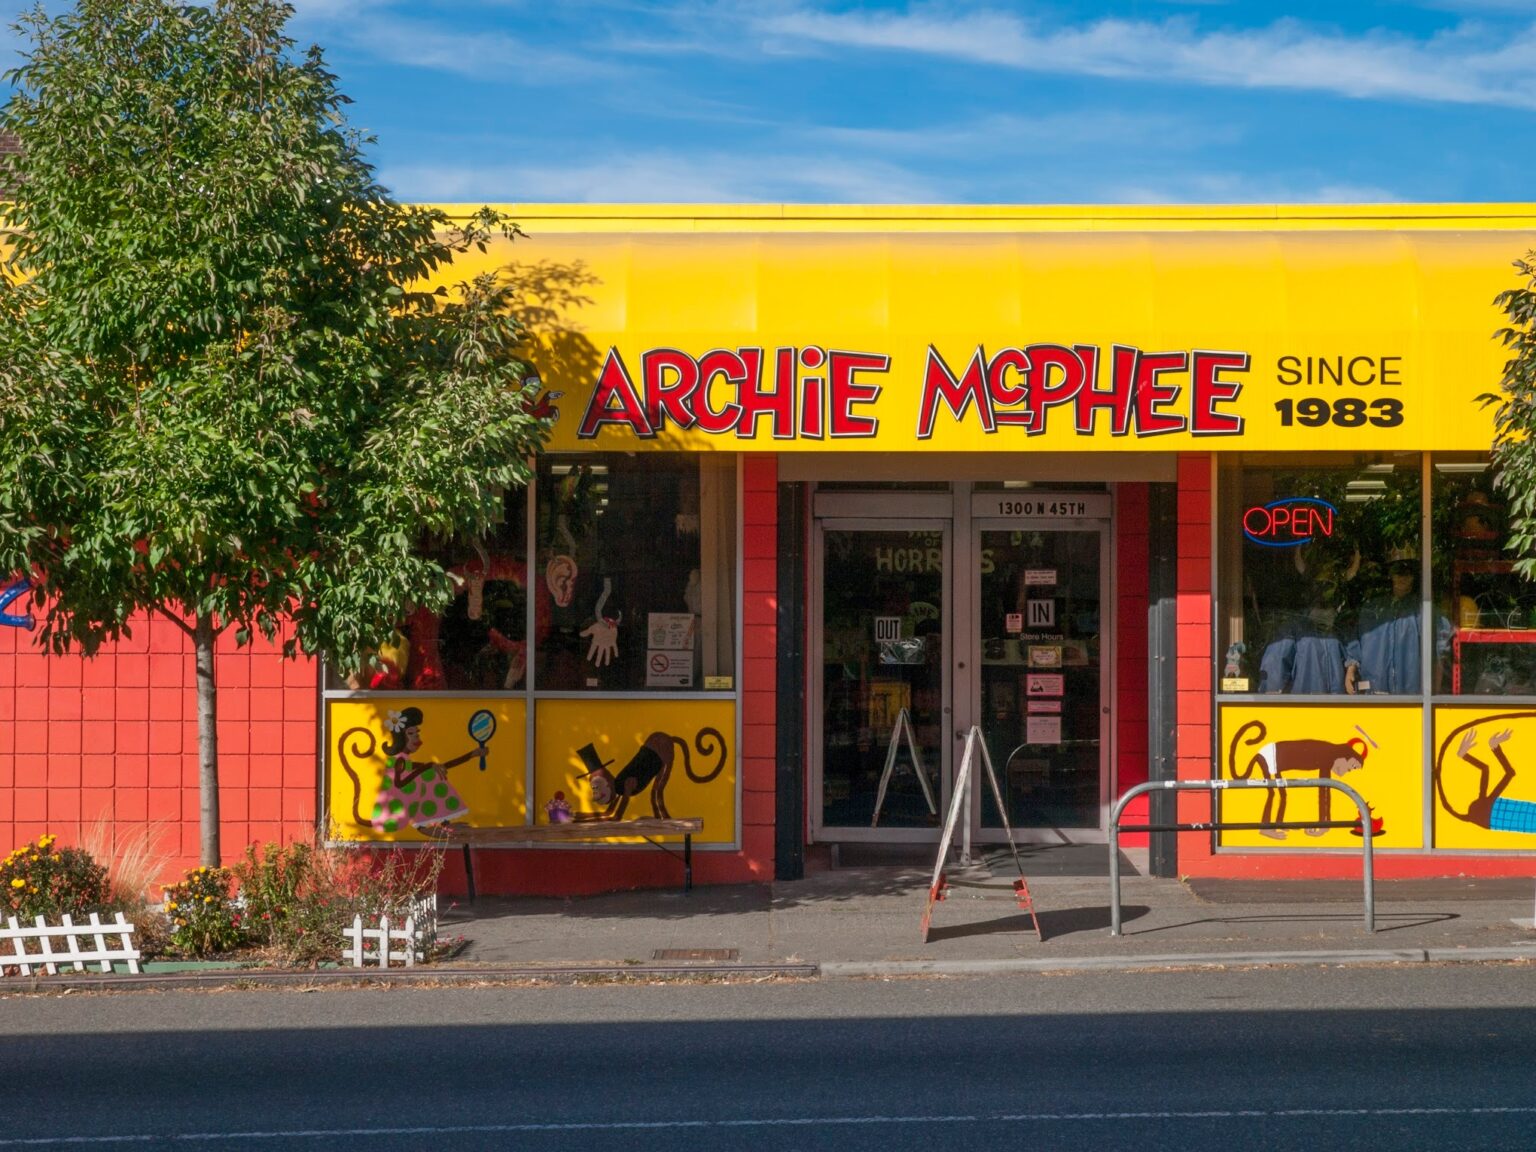 The storefront of Archie McPhee in Seattle, with its classic bright yellow and bright red colors.